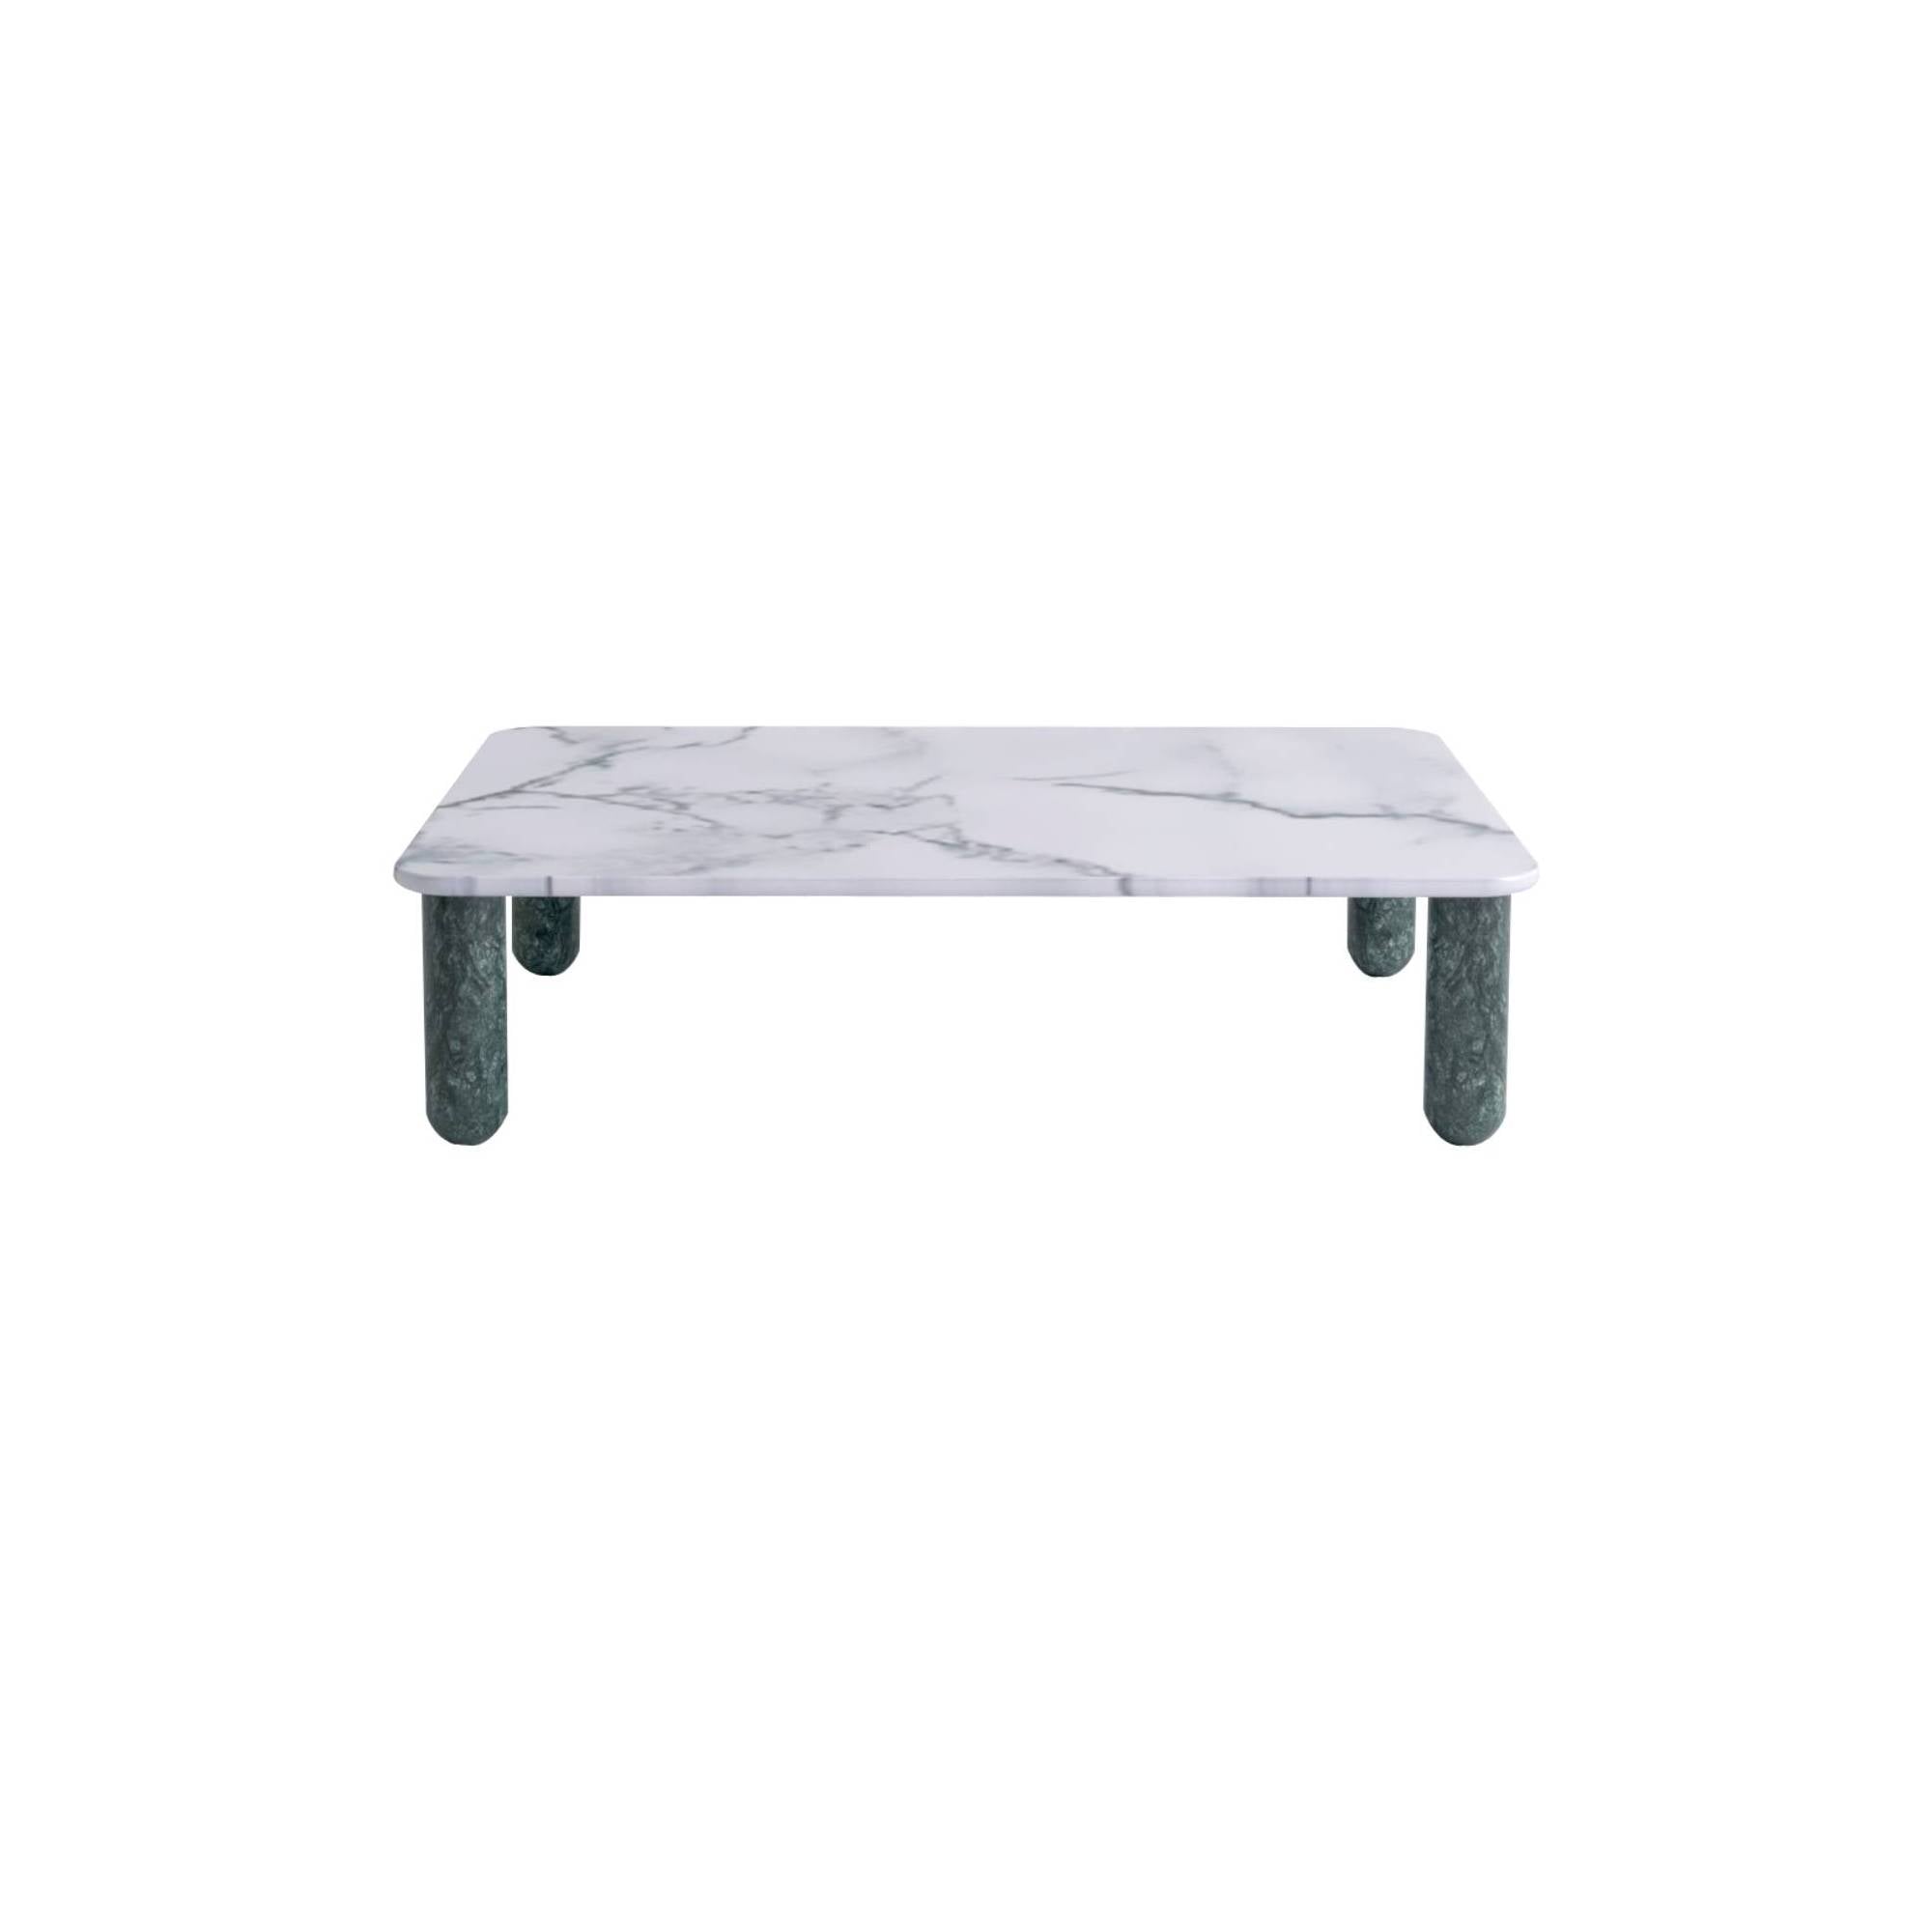 Sunday Coffee Table: White Pele de Tigre Marble + Indian Green Marble